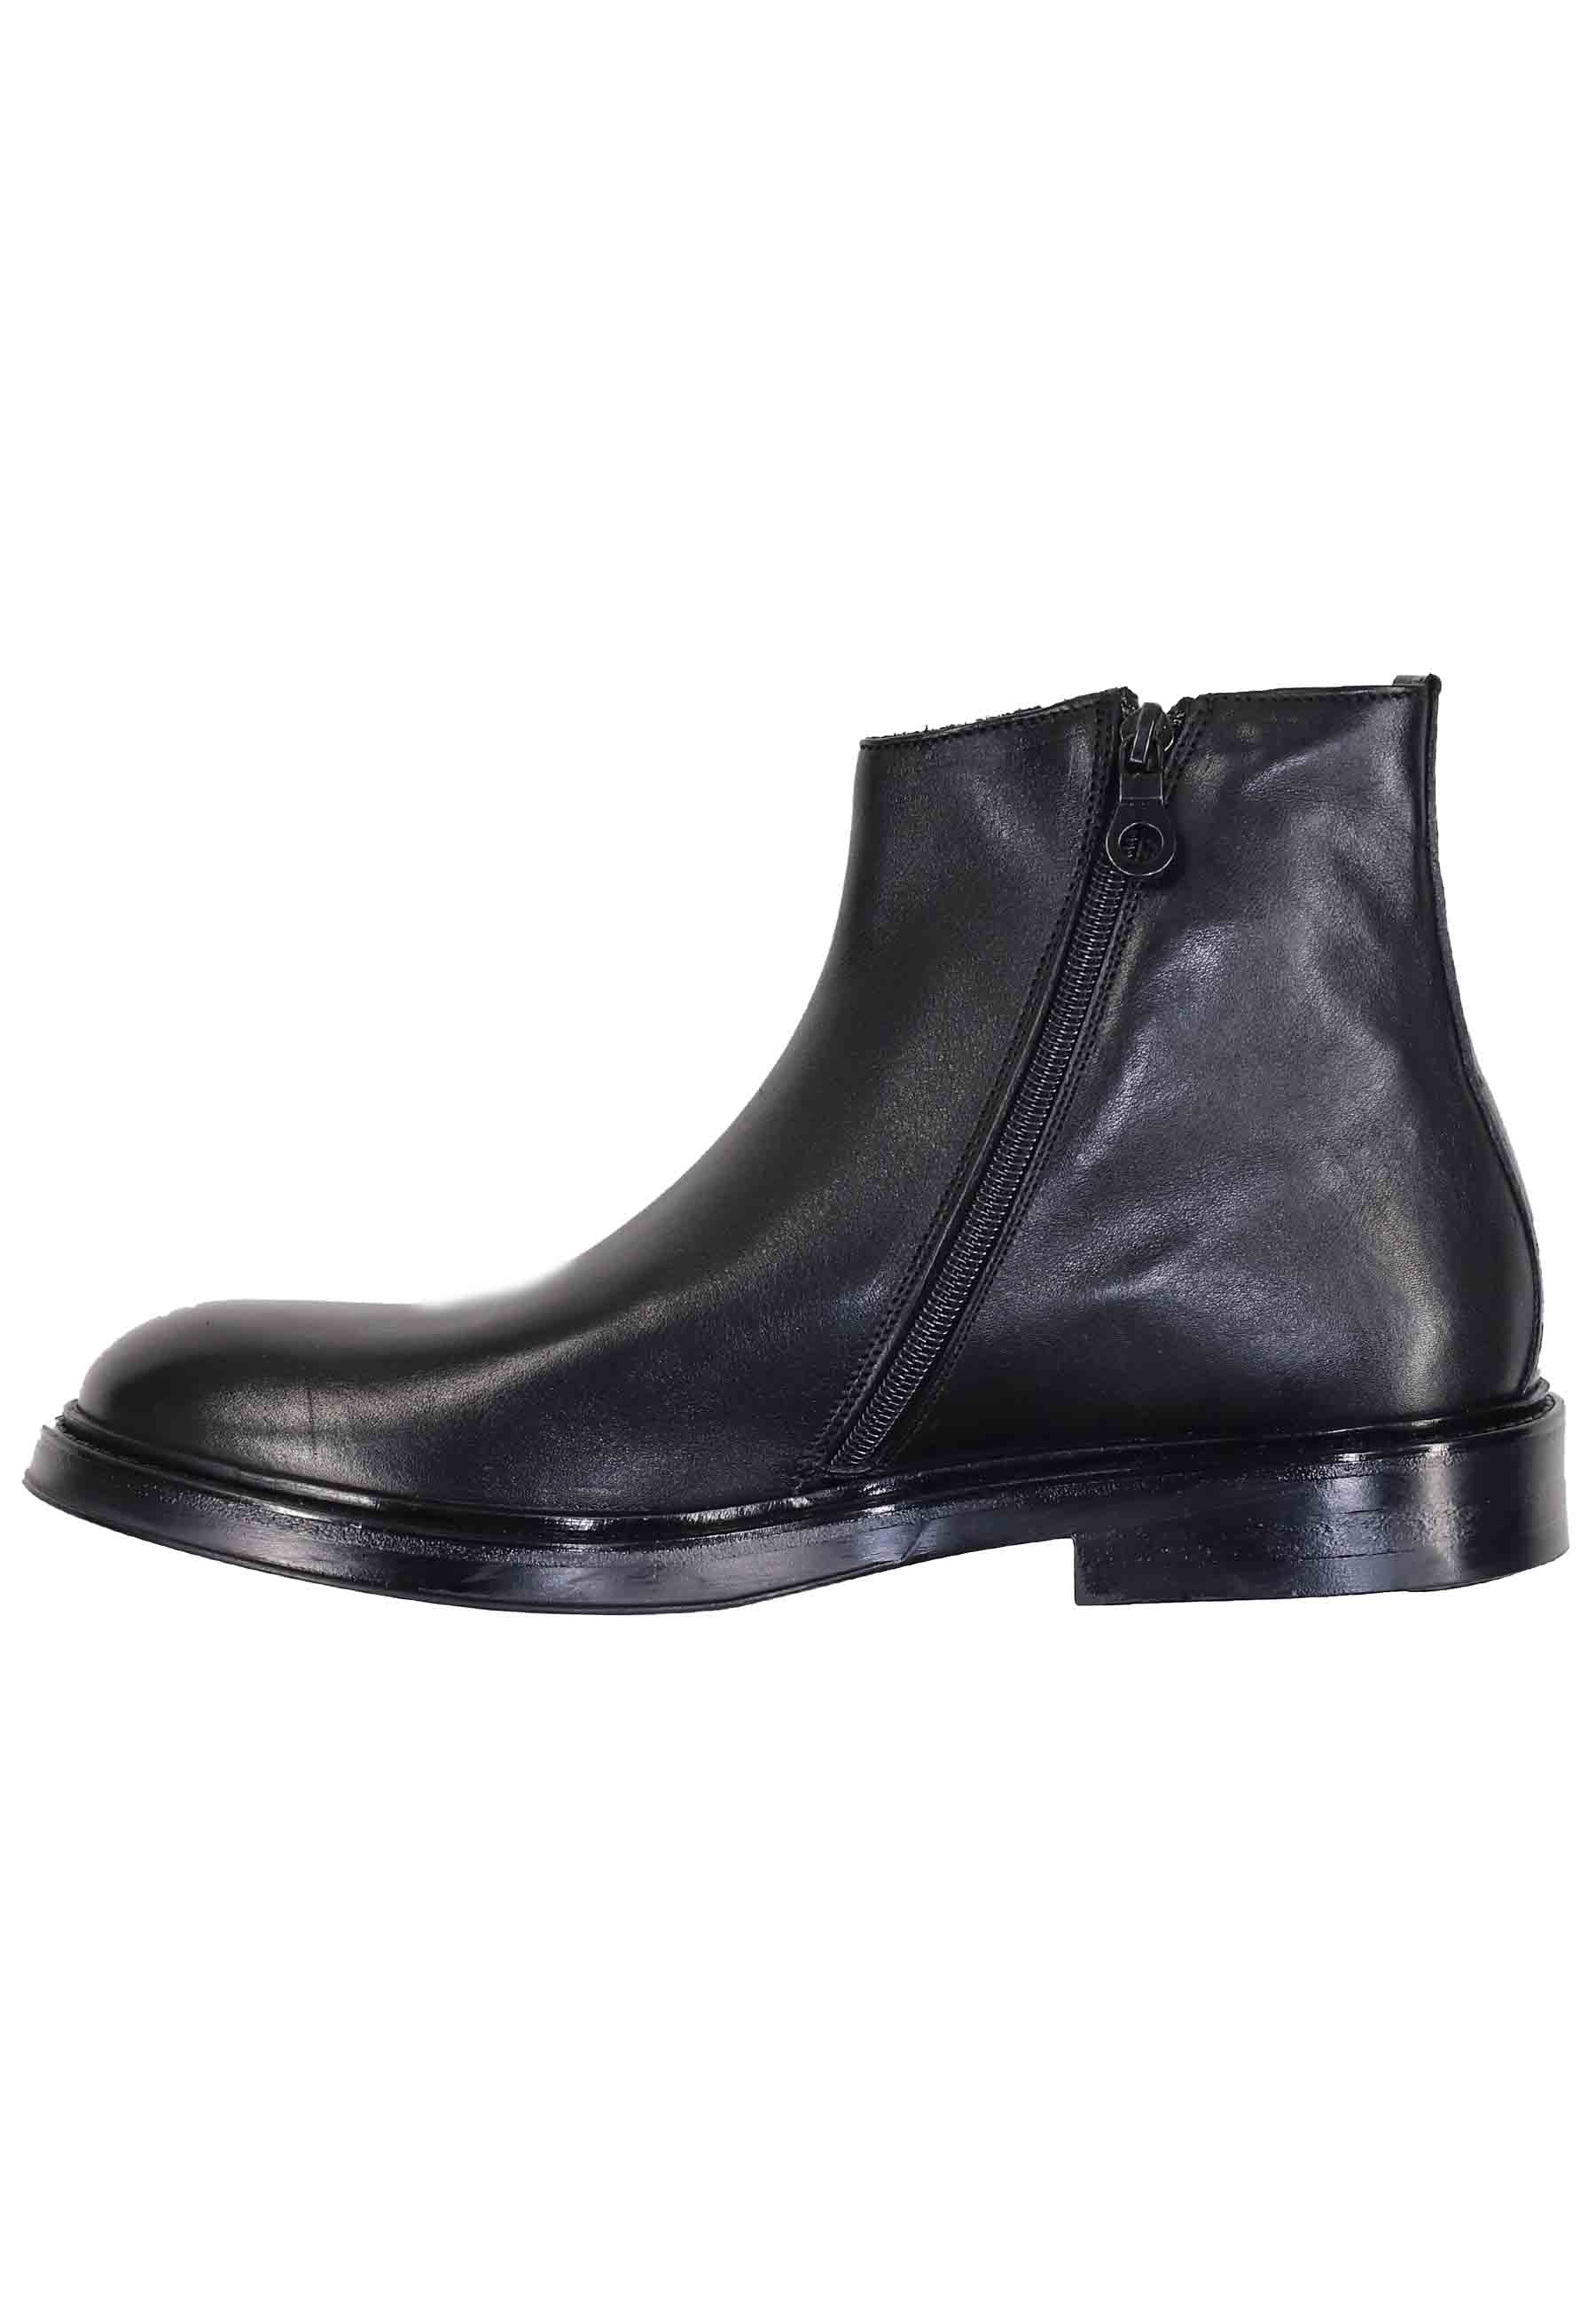 Men's black leather ankle boots with side zip and rubber sole